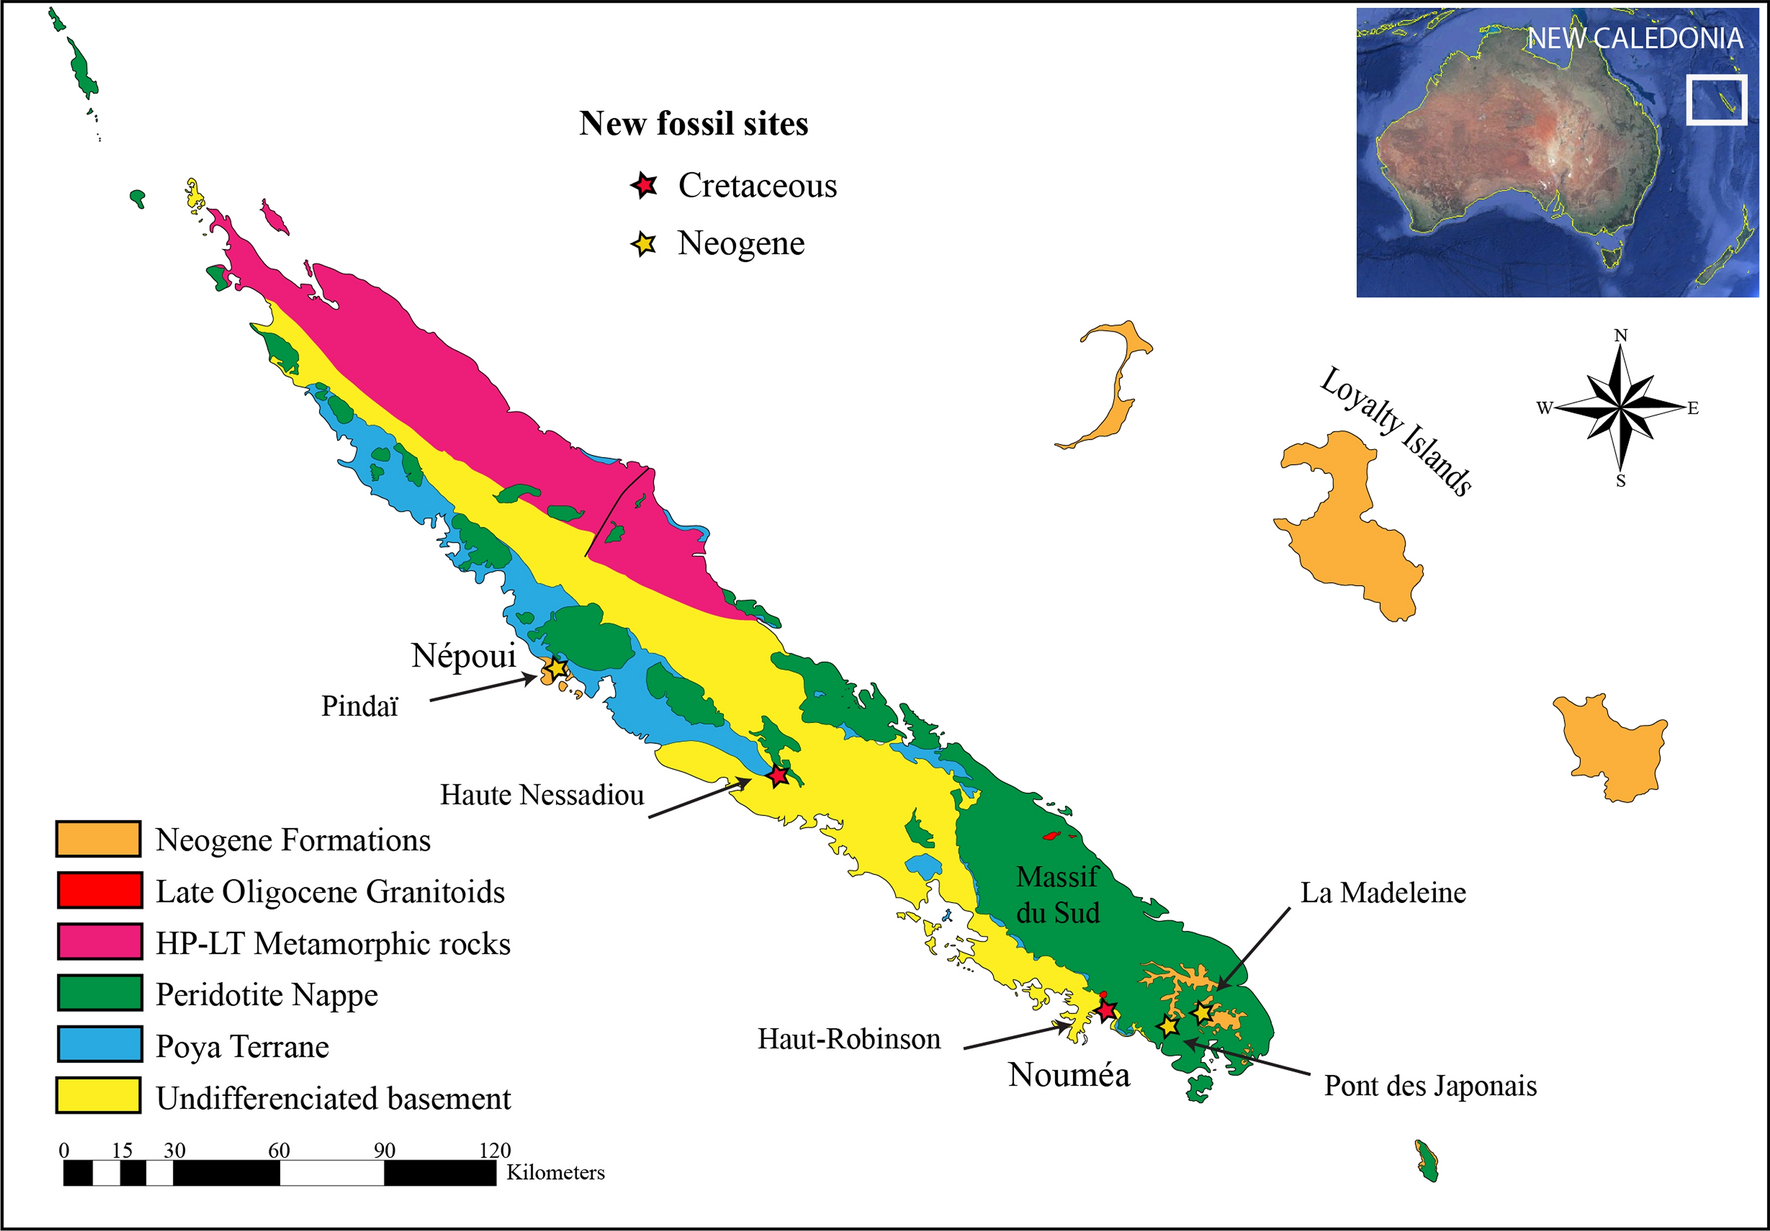 New fossil discoveries illustrate the diversity of past terrestrial  ecosystems in New Caledonia | Scientific Reports